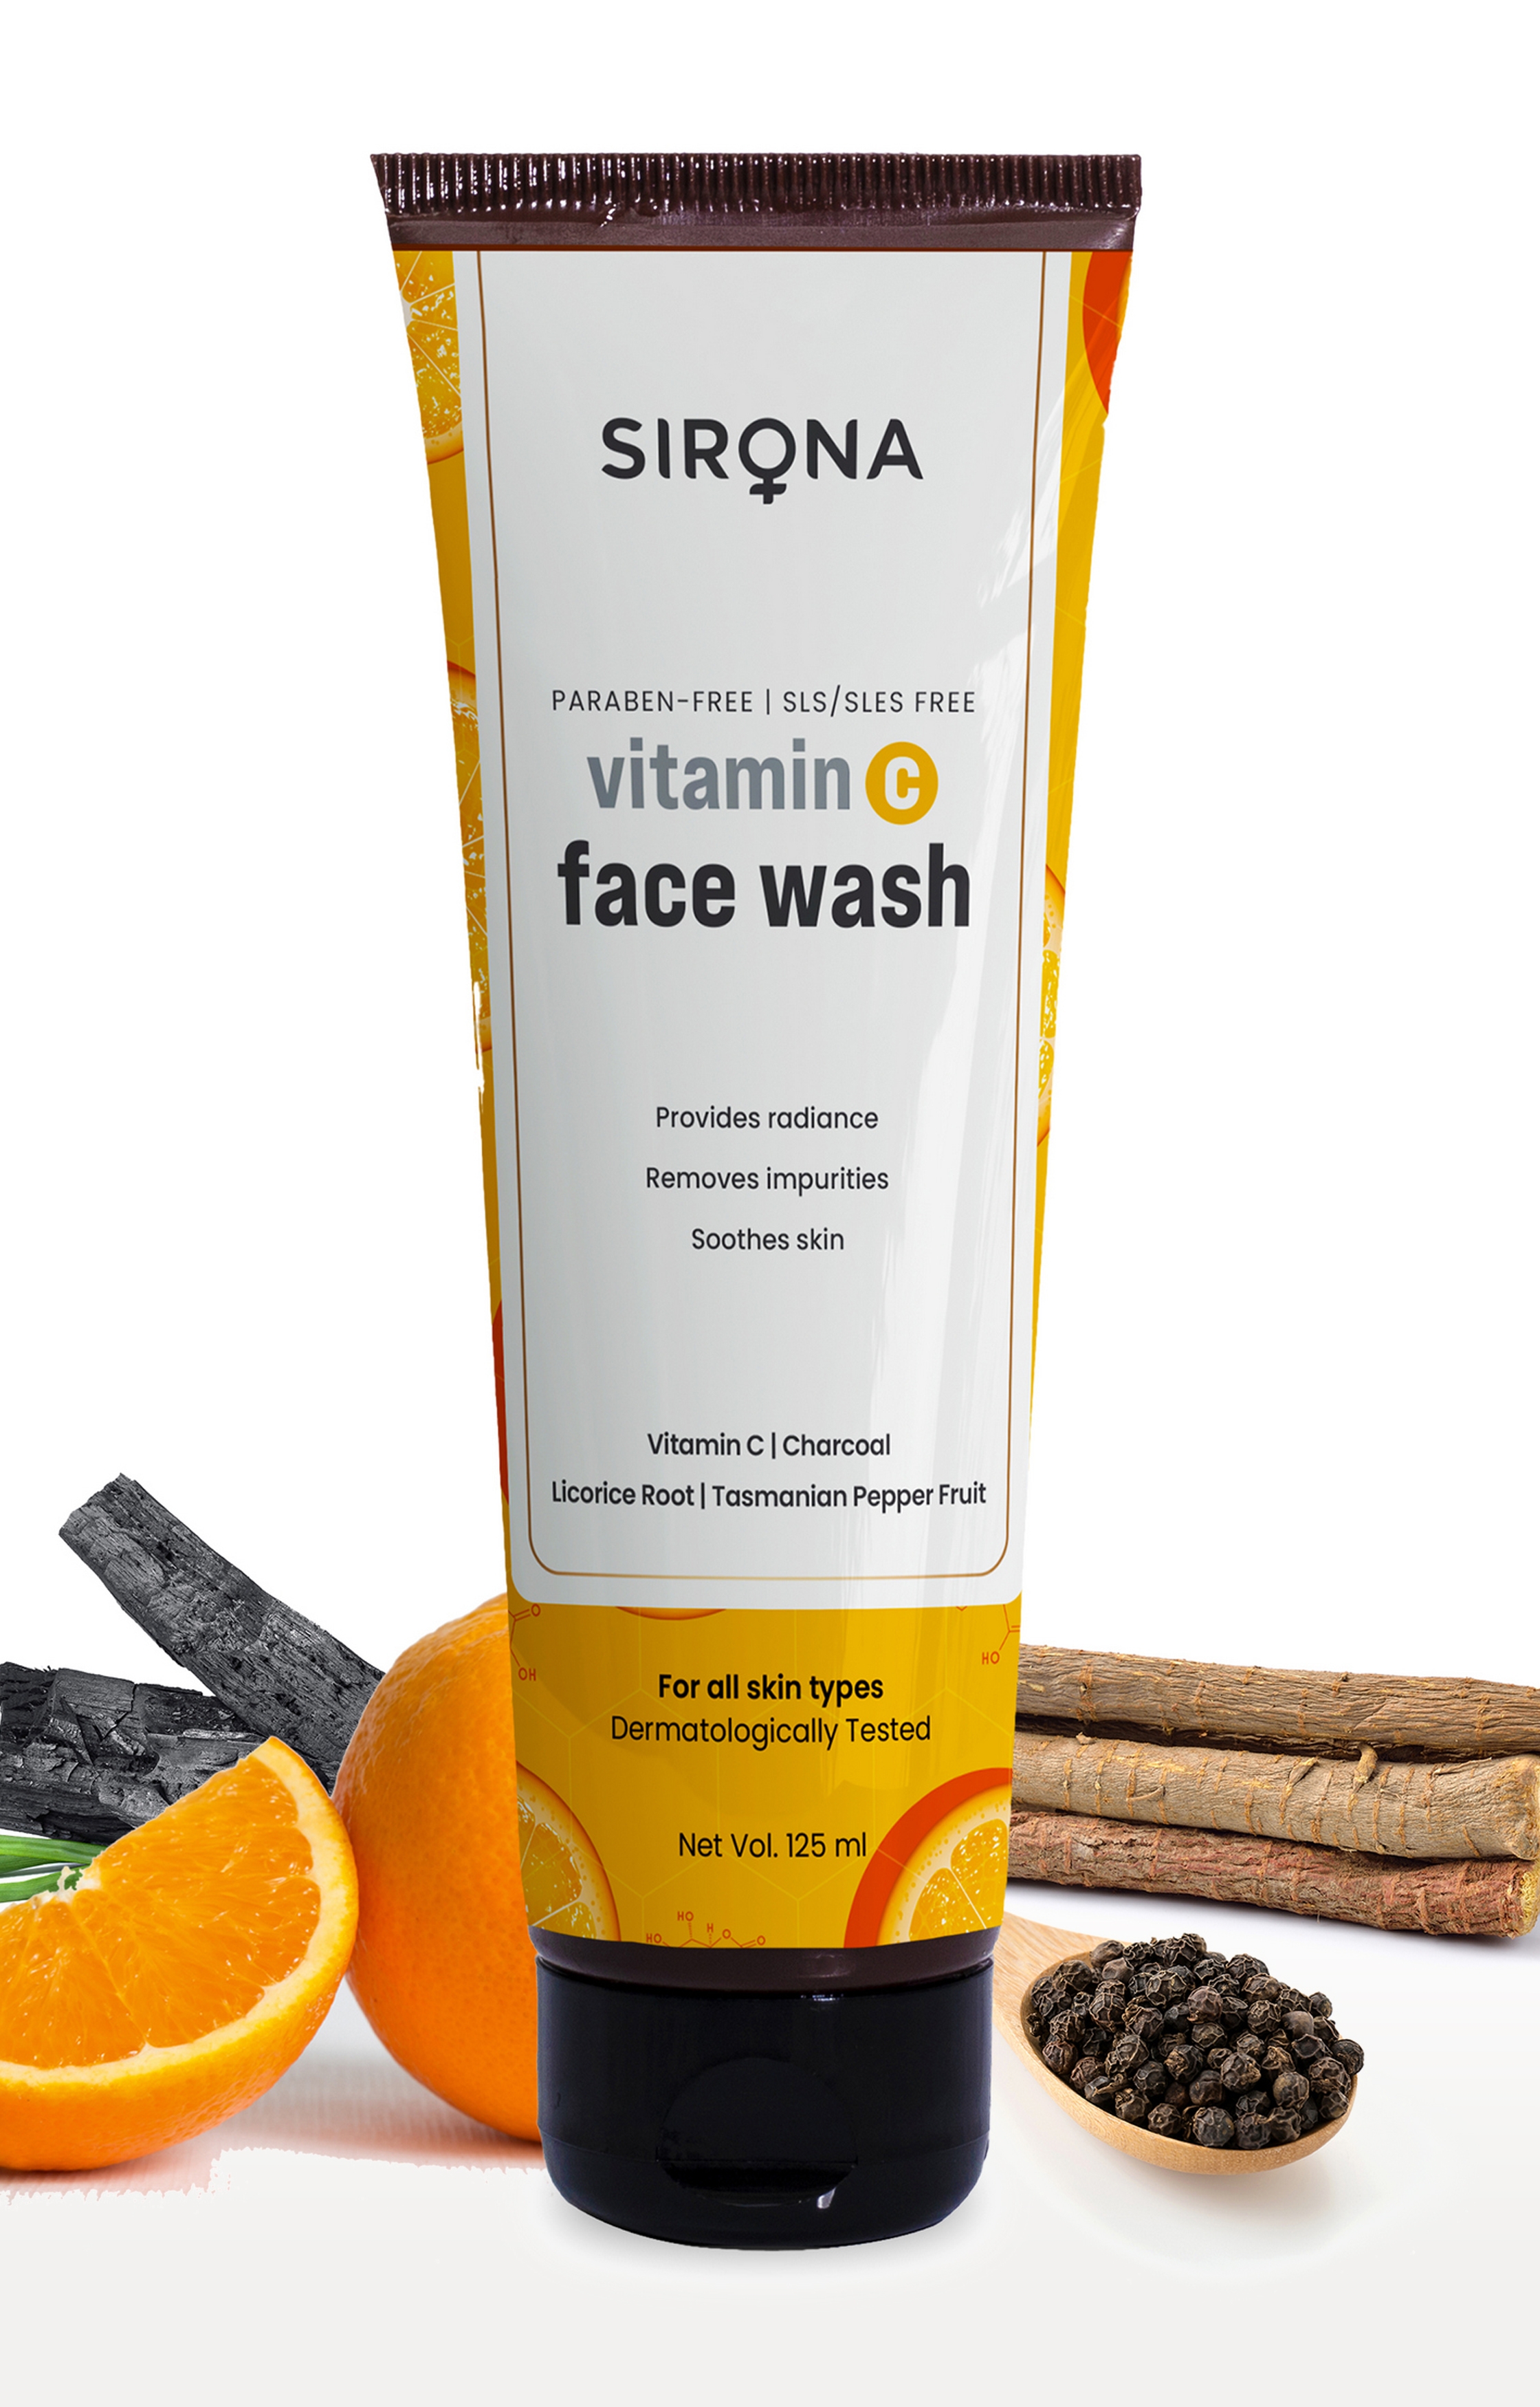 Sirona | Sirona Vitamin C Face Wash For Men & Women – 125 Ml With Charcoal Licorice Root & Tasmanian Pepper Fruit